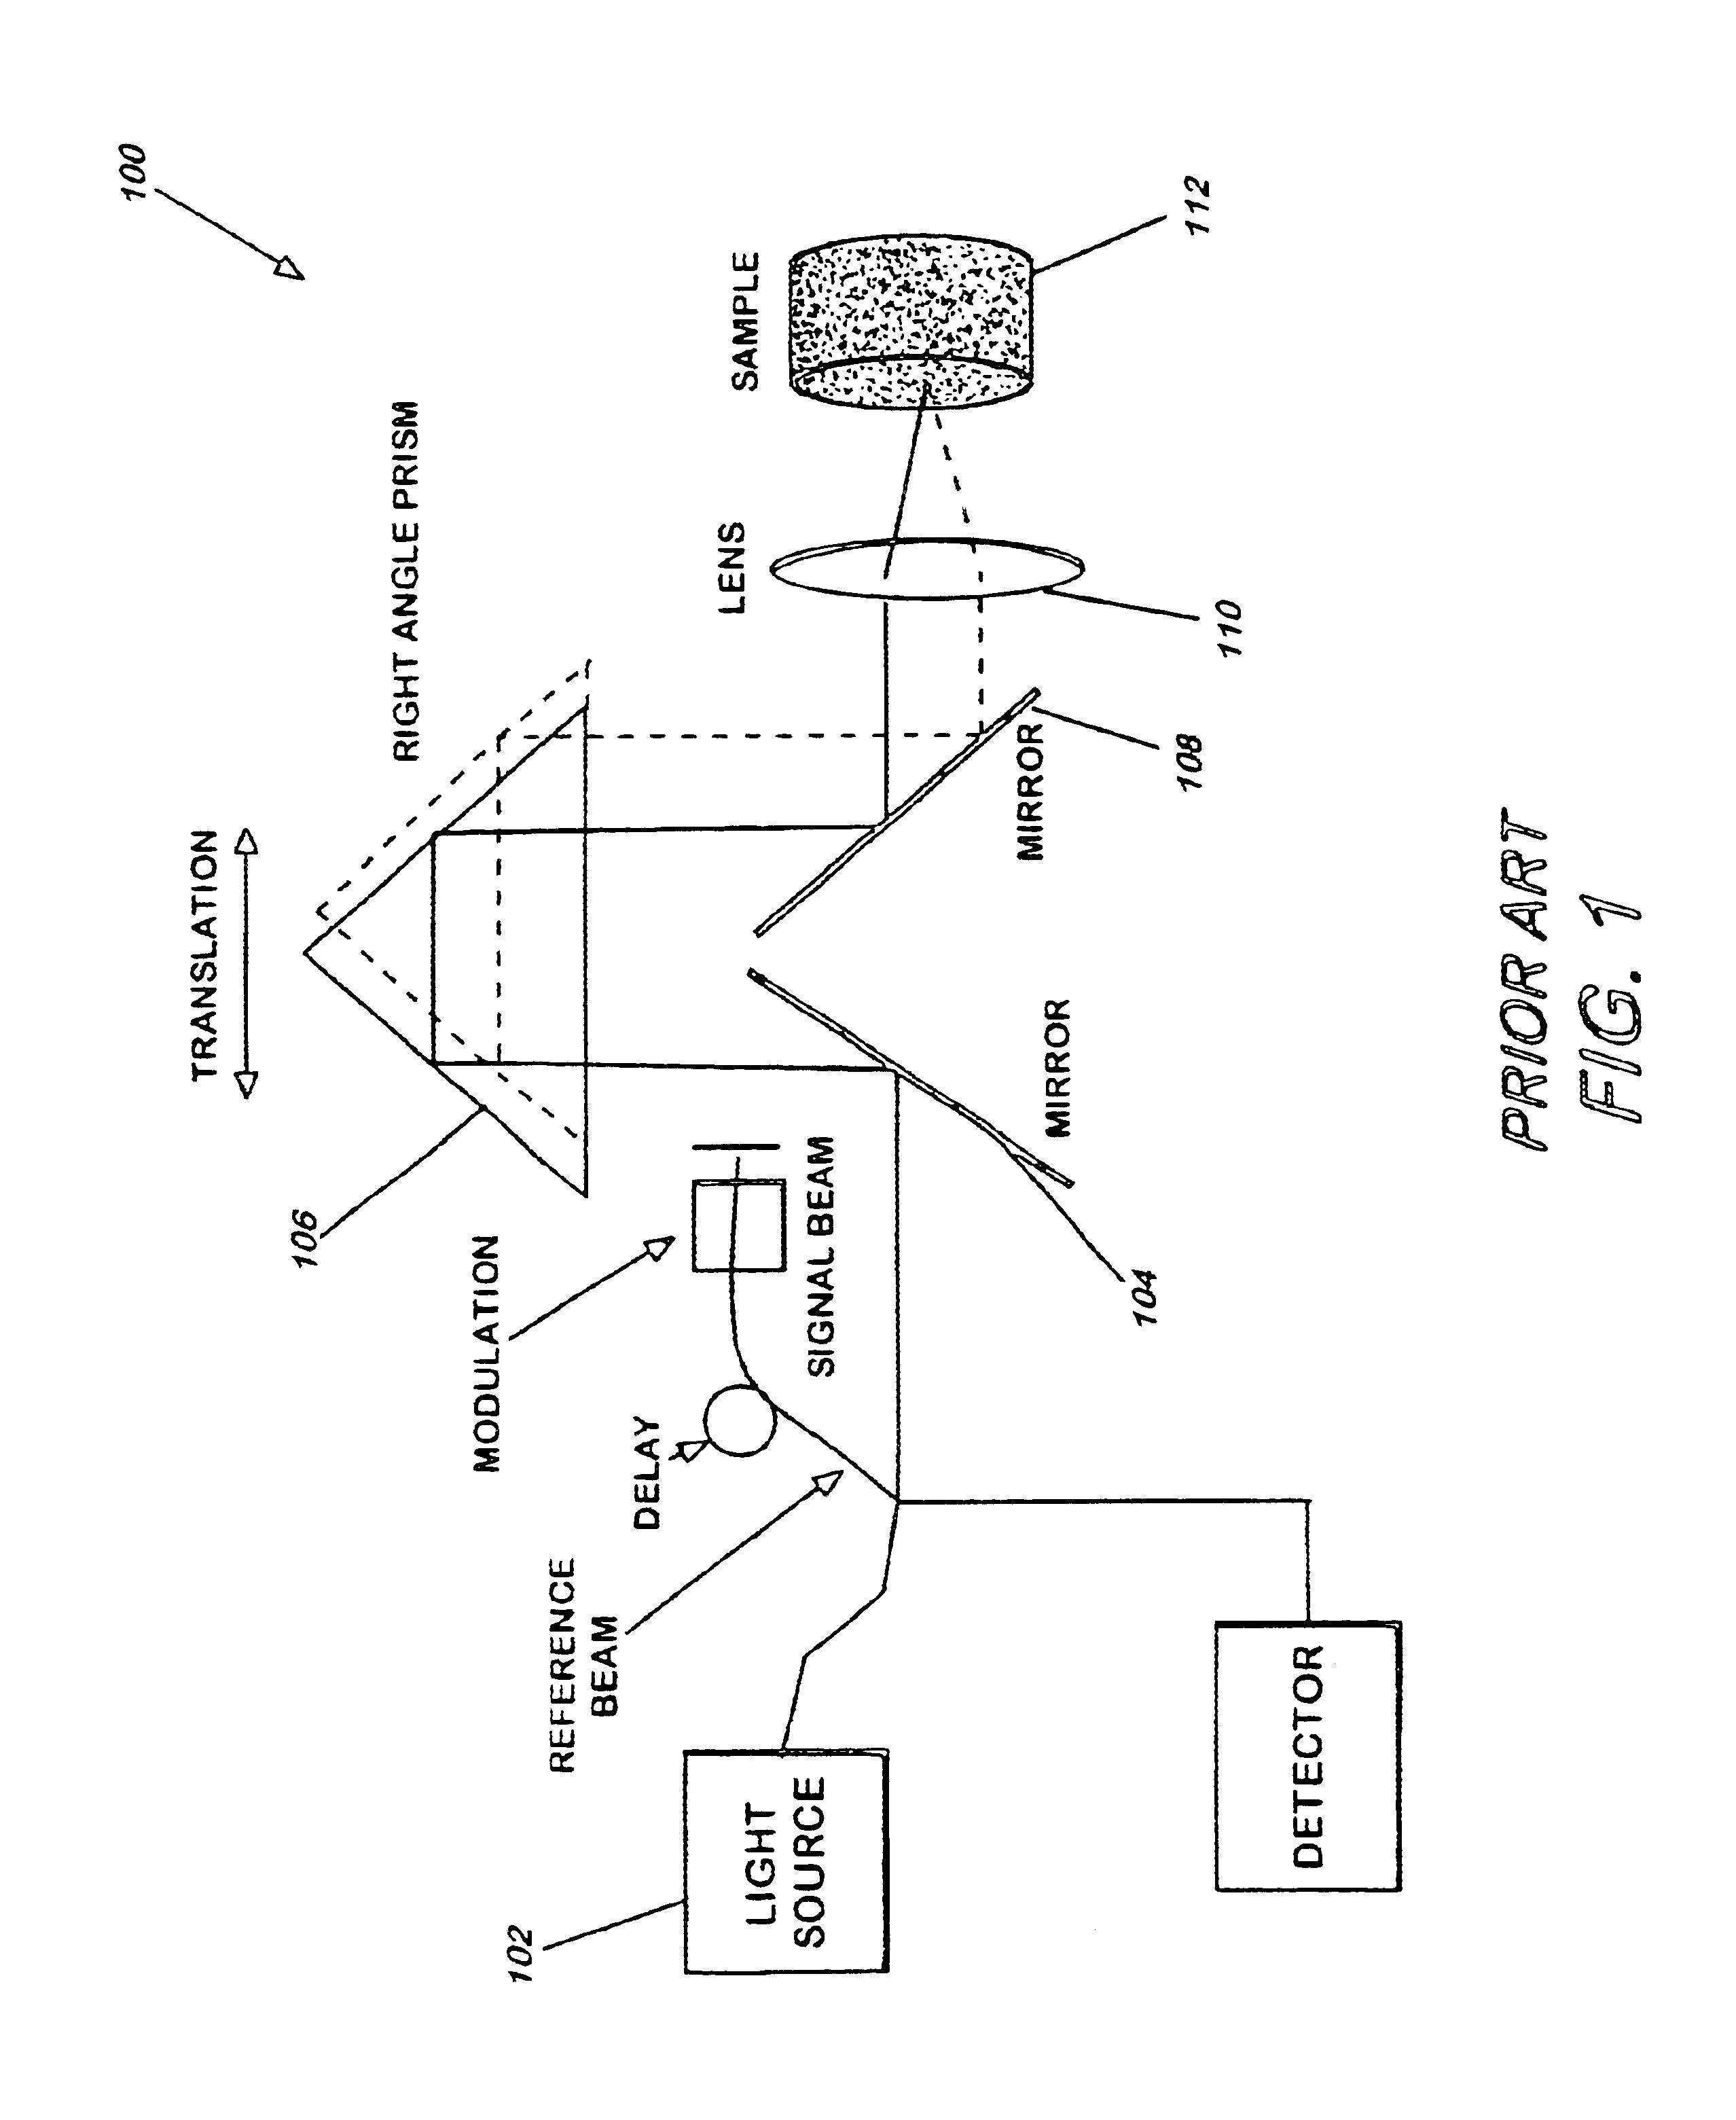 Method and apparatus for reducing speckle in optical coherence tomography images